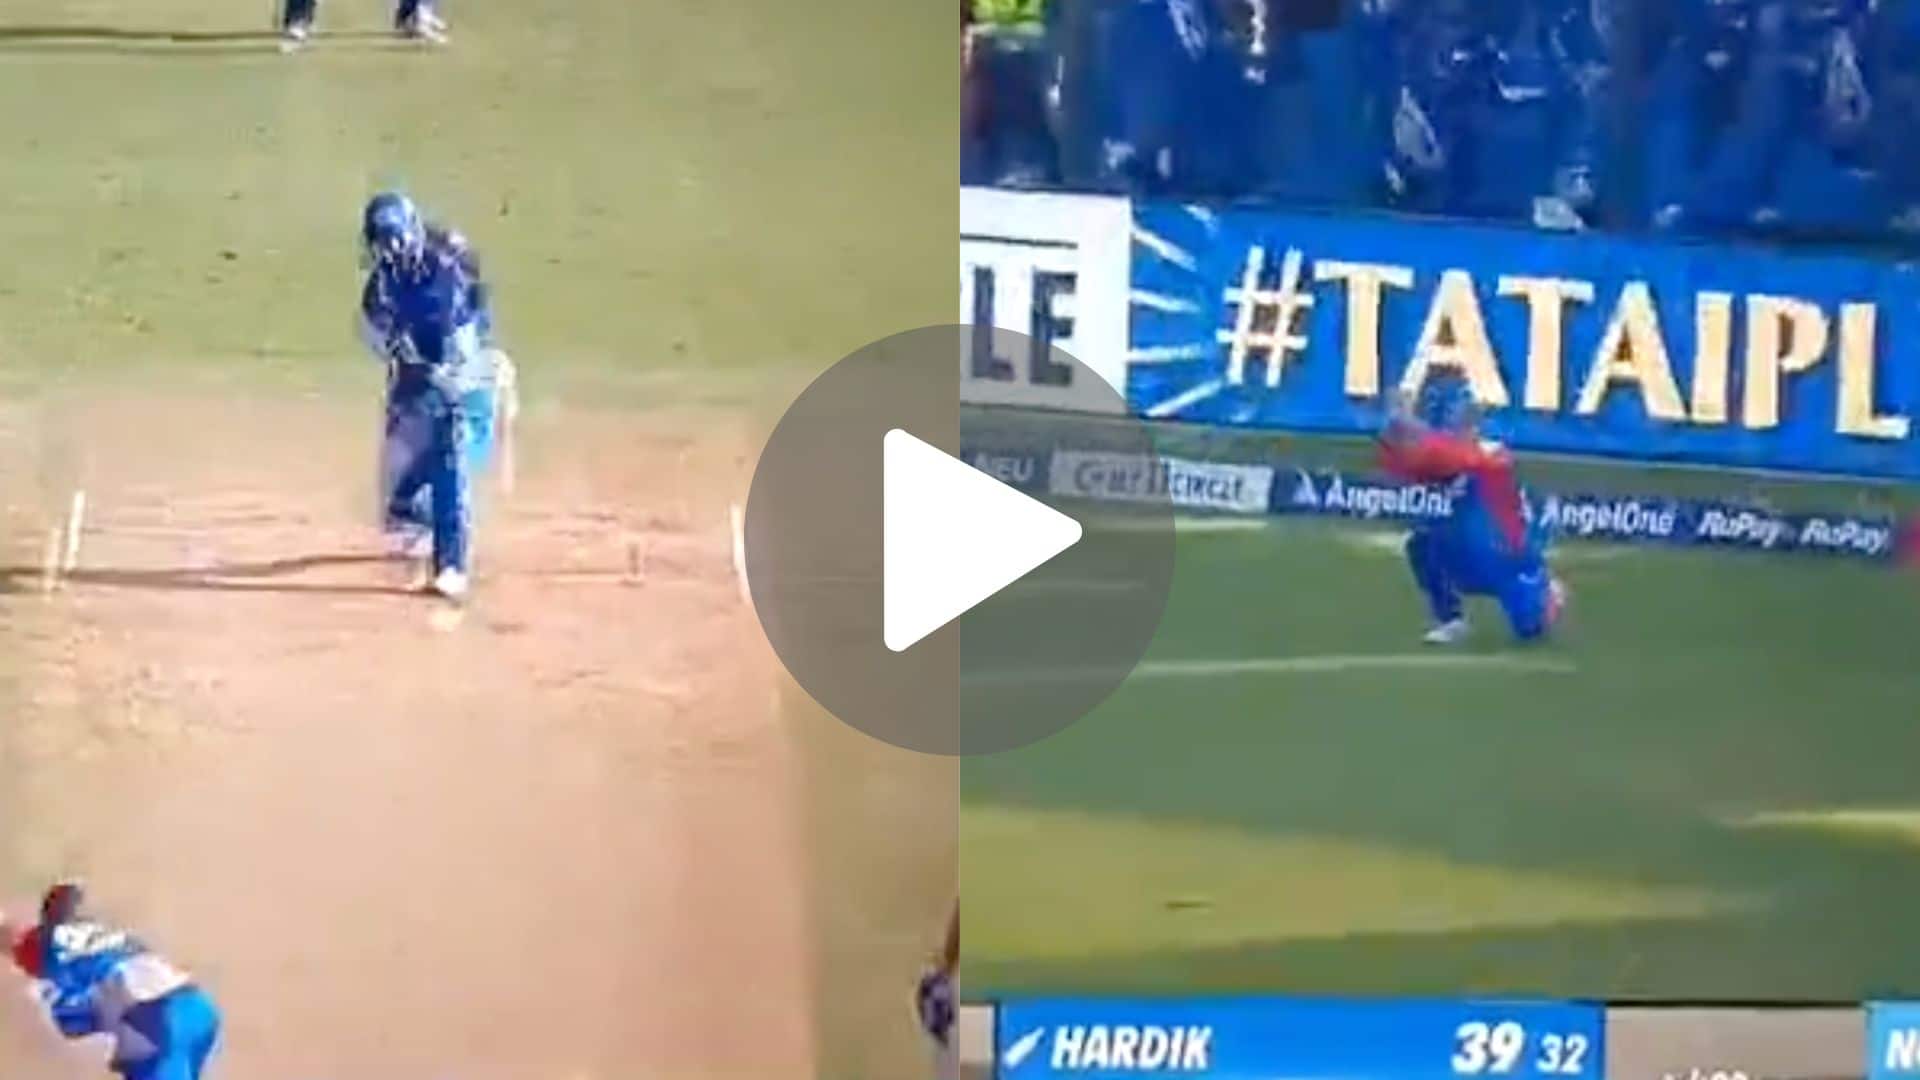 [Watch] Hardik Pandya's Painful Knock Ends As He Fails To Connect A Loopy Full Toss